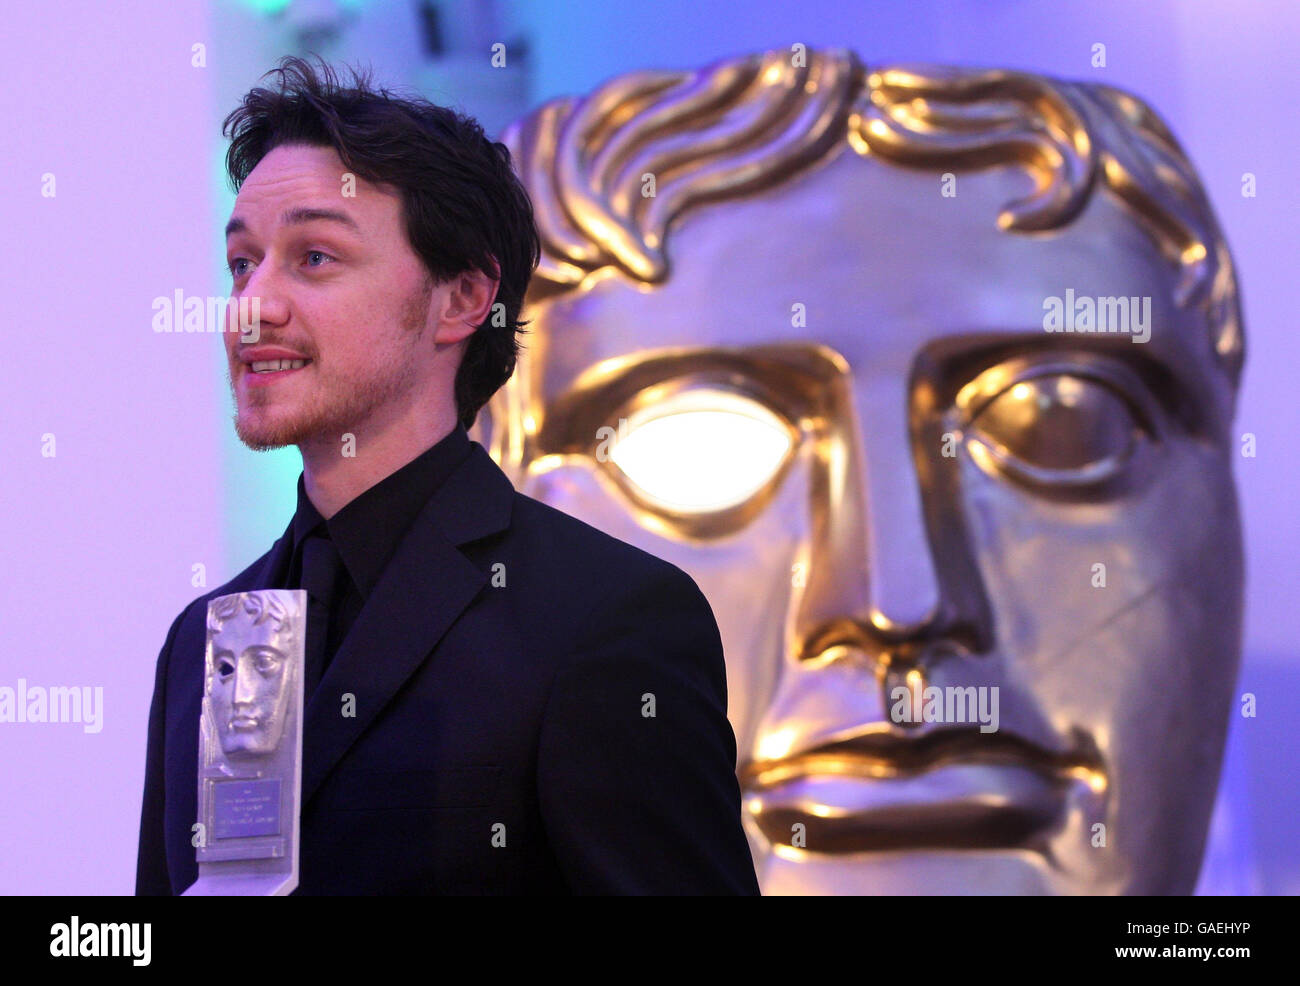 BAFTA Scotland Awards - Glasgow. James McAvoy with his award for best actor at the BAFTA Scotland Awards held at the City Halls in Glasgow. Stock Photo